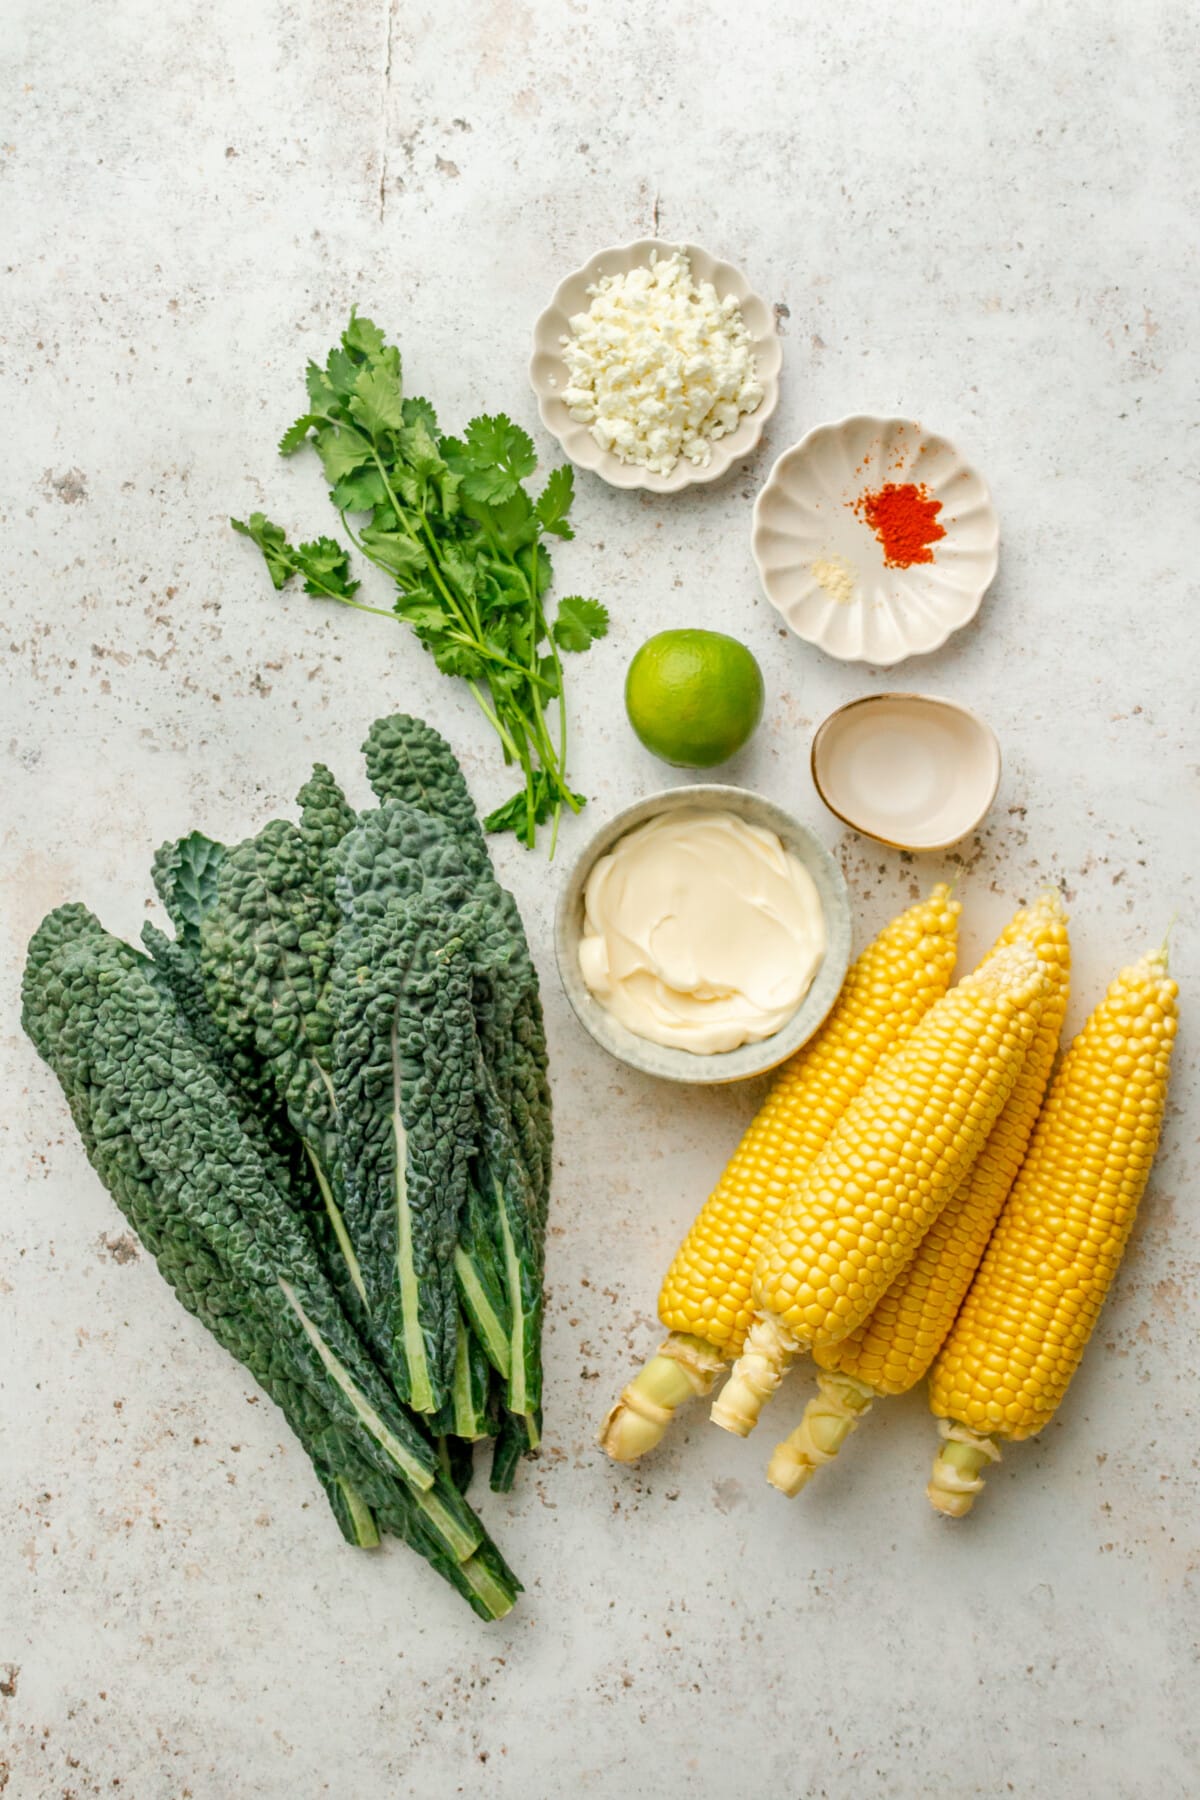 Ingredients for Mexican street corn and kale slaw sit in a variety of bowls on a light grey surface.